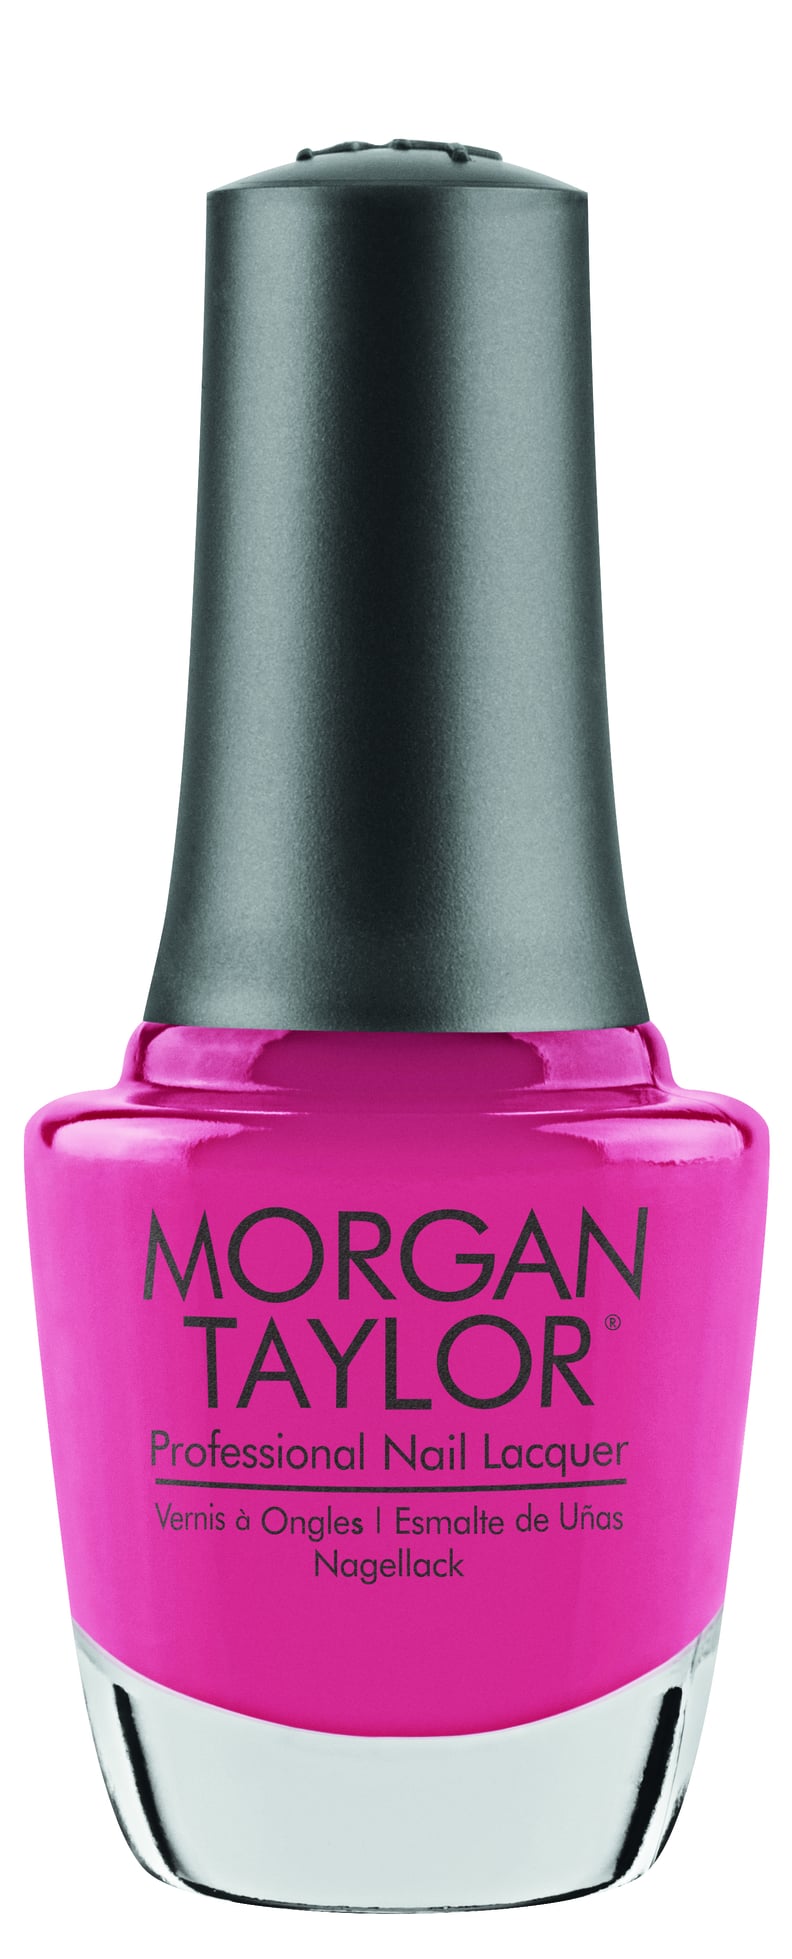 Morgan Taylor Professional Nail Lacquer in Be Our Guest